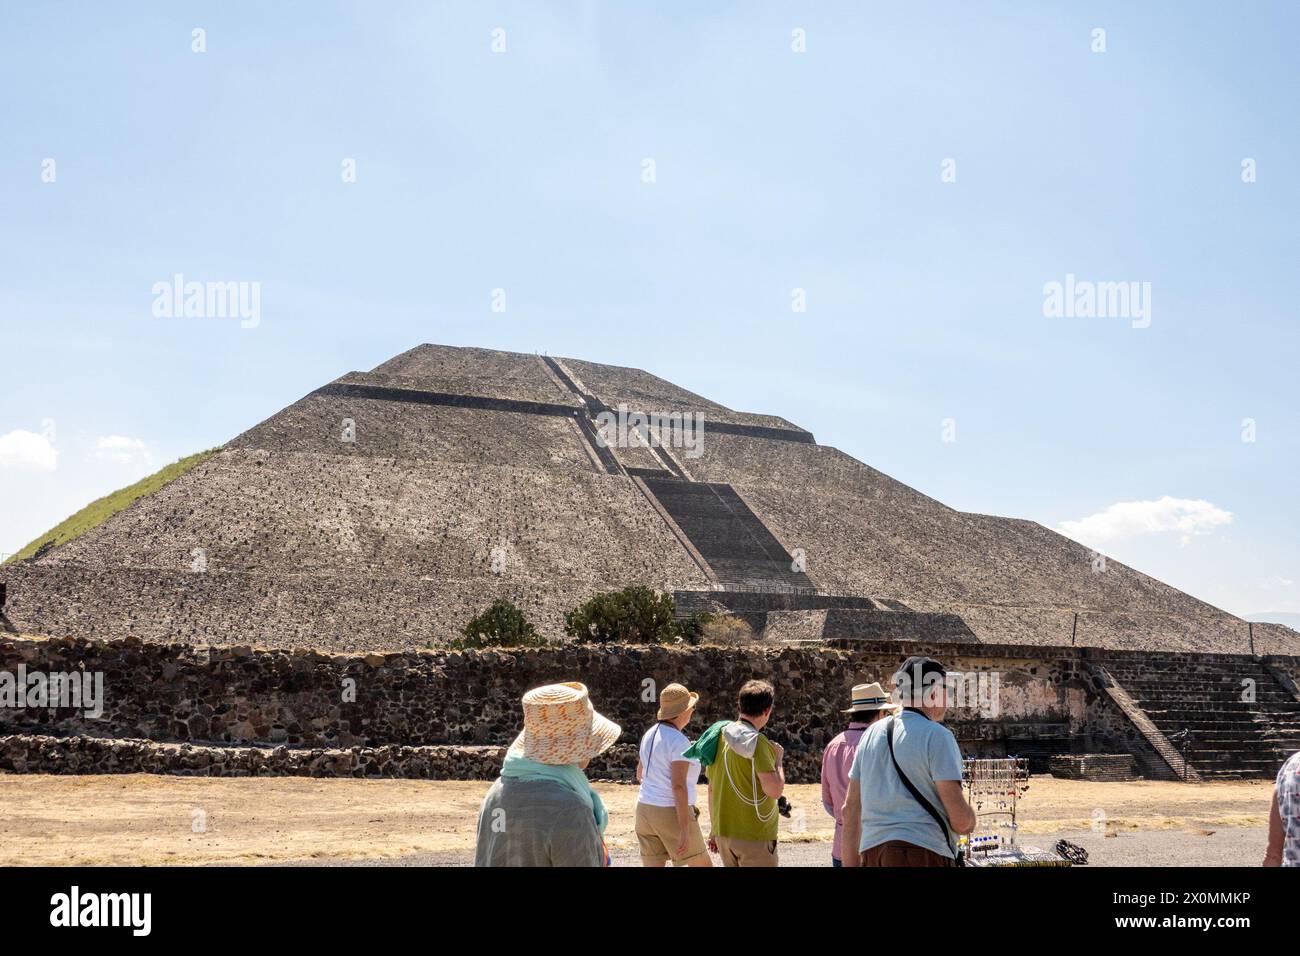 Tourists explore Teotihuacán, ancient Mesoamerican city famous for its impressive pyramids, including the Pyramid of the Sun and the Pyramid of the Moon. Stock Photo